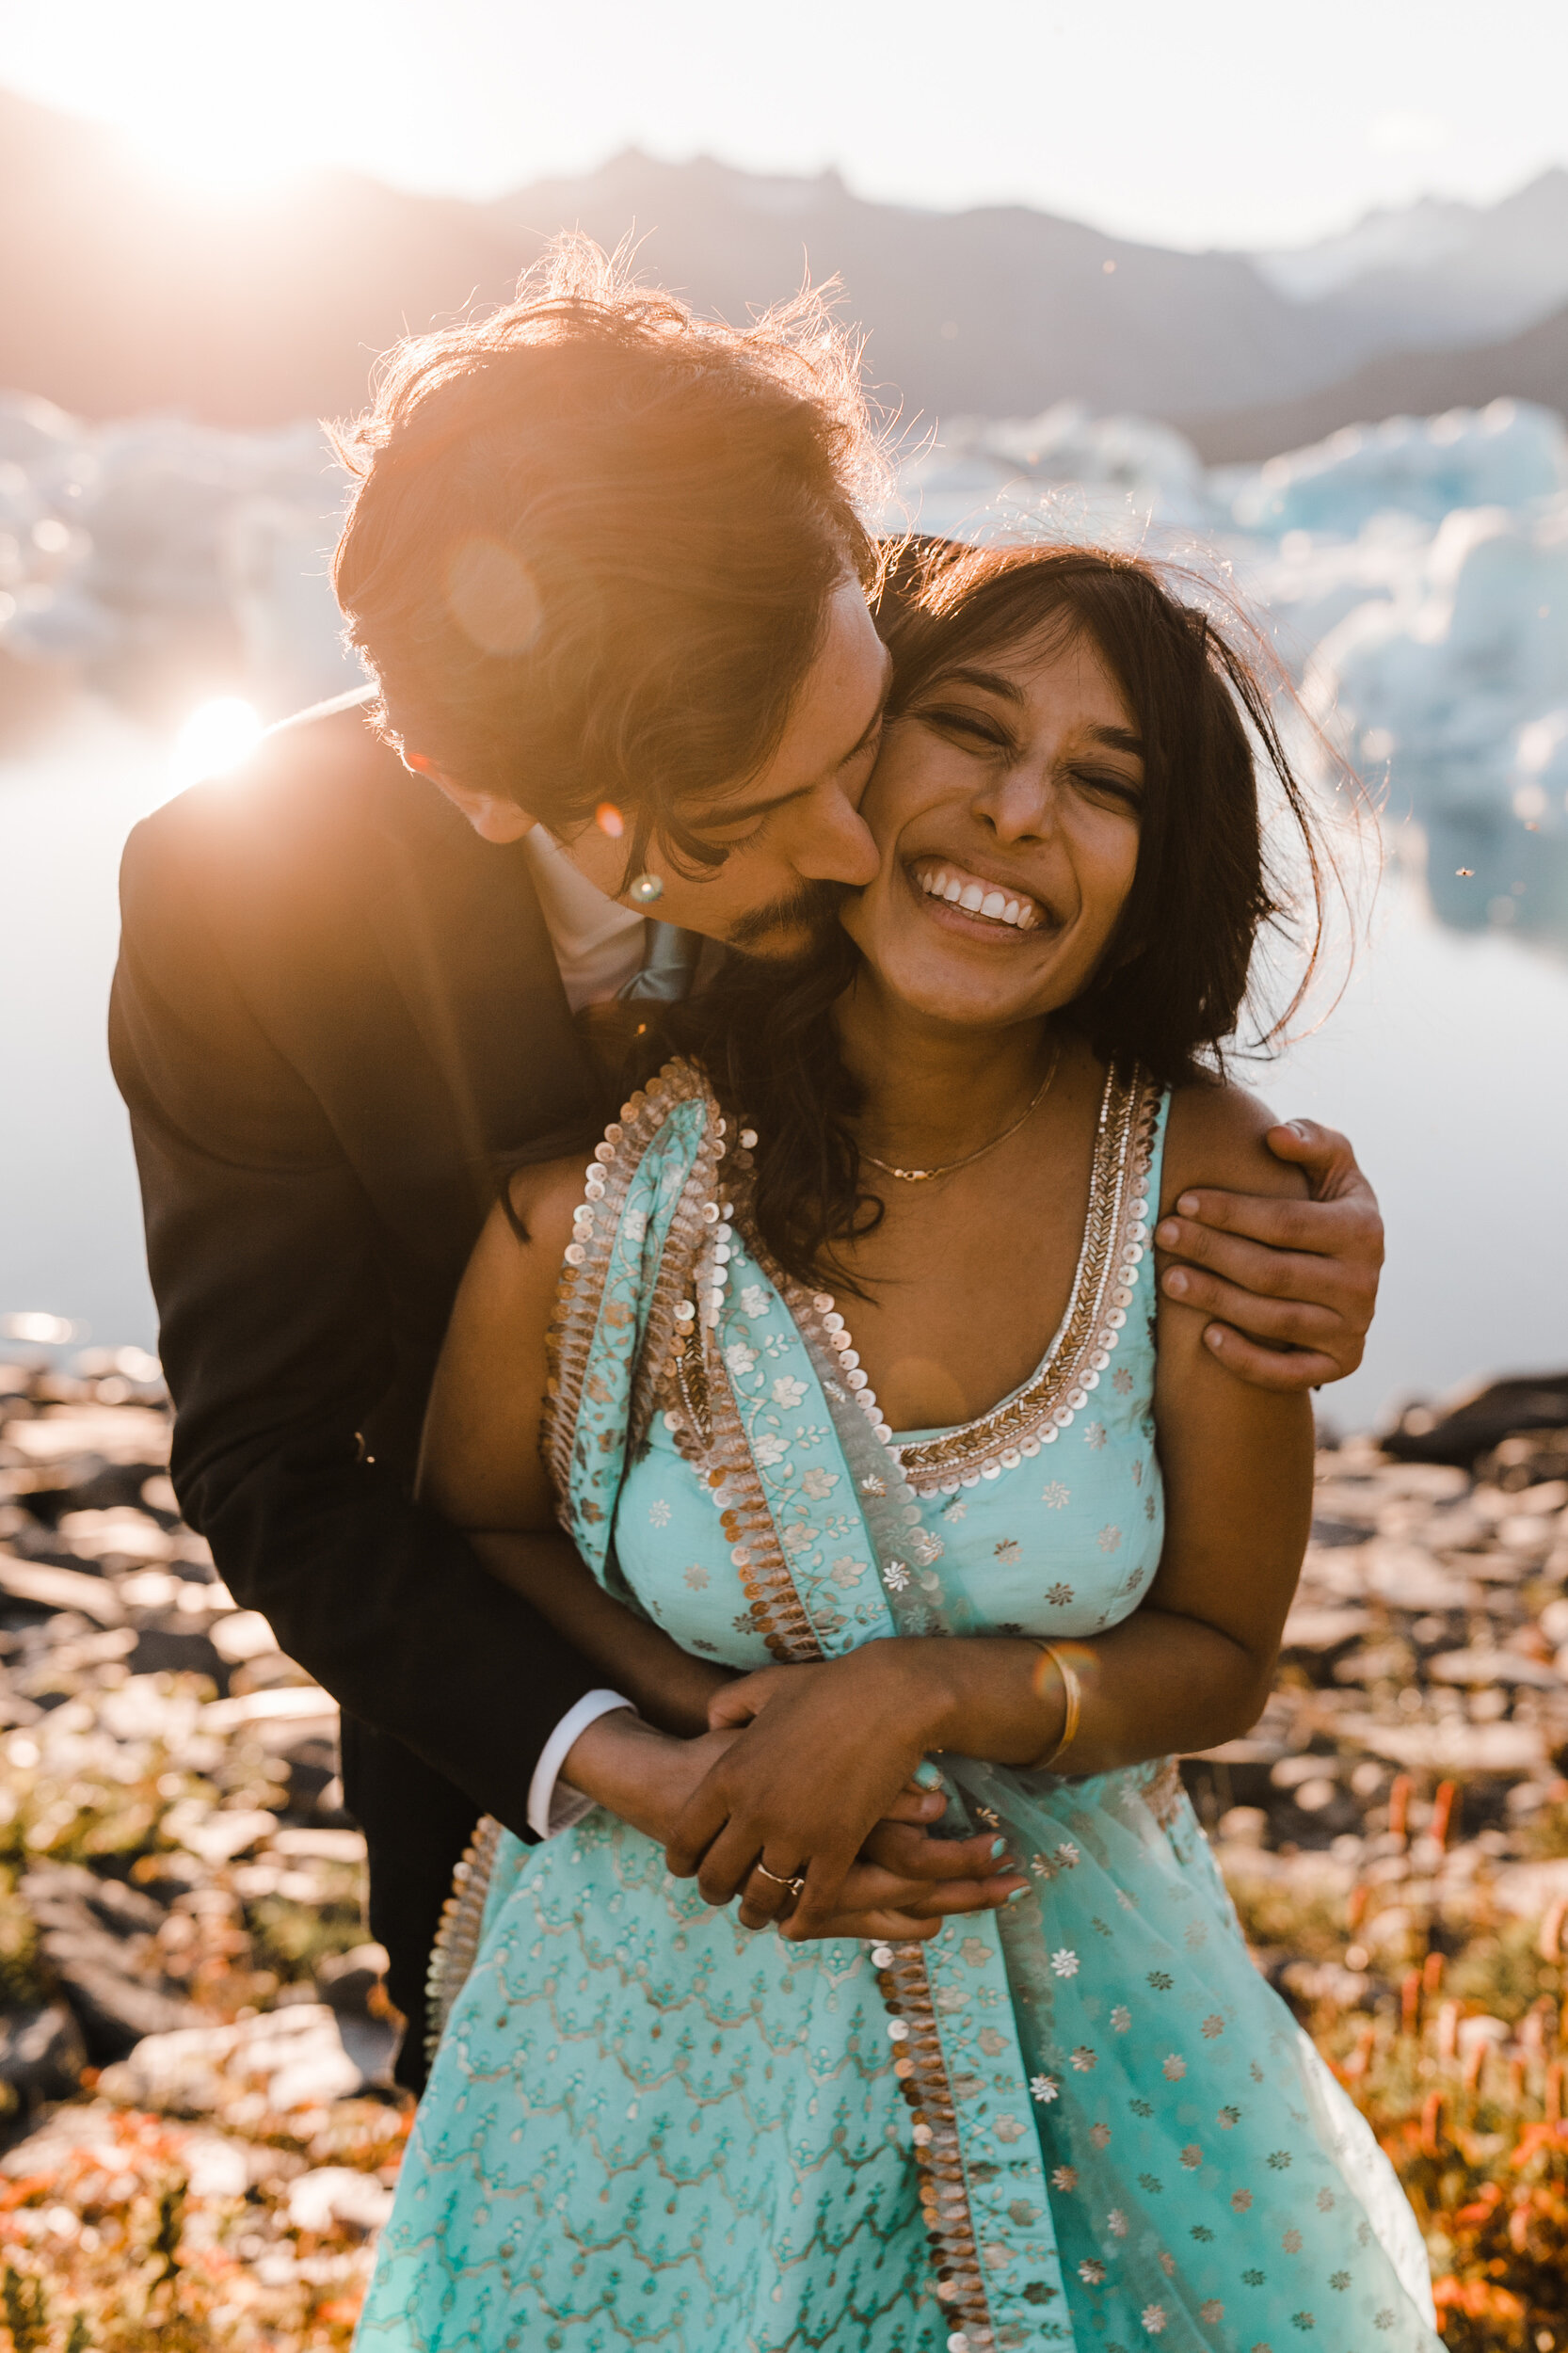 Traditional Indian Wedding Clothing in Alaska | Best of 2020, Our Favorite Wedding Photos of the Year | The Hearnes Adventure Wedding Photography